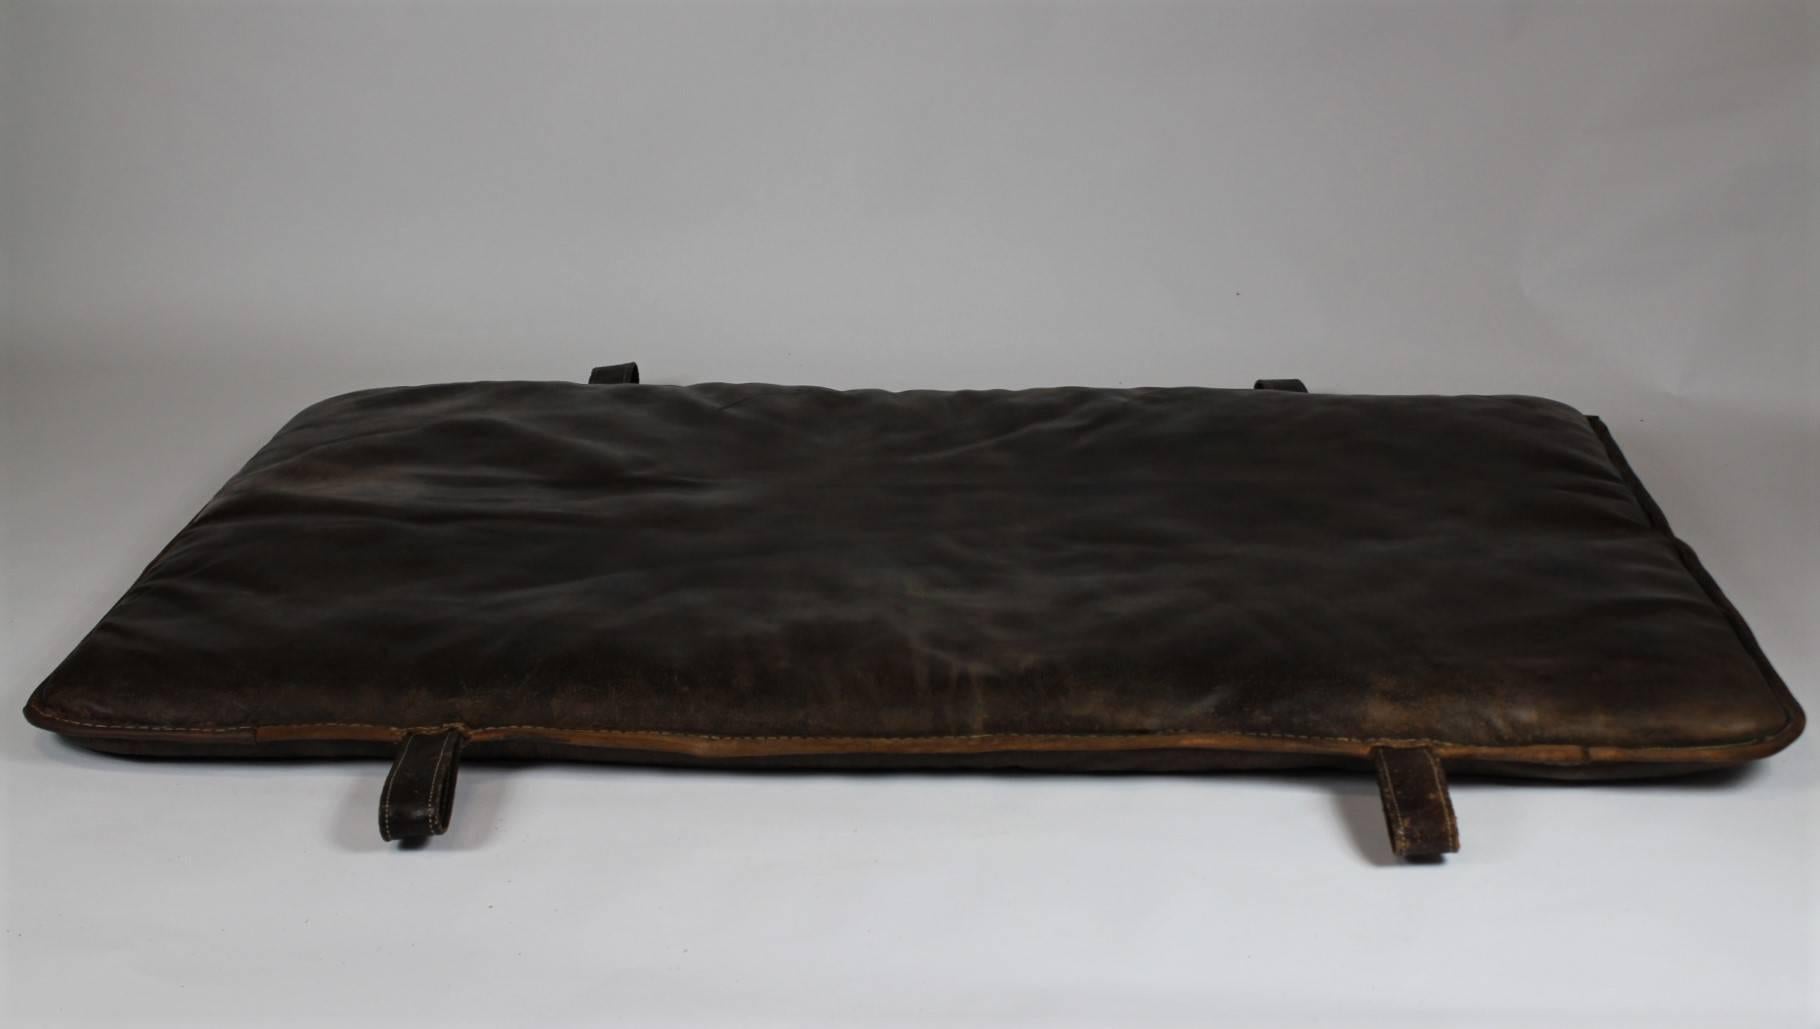 Leather gym mat from the 1930s. It is in its good original condition with nice patina.